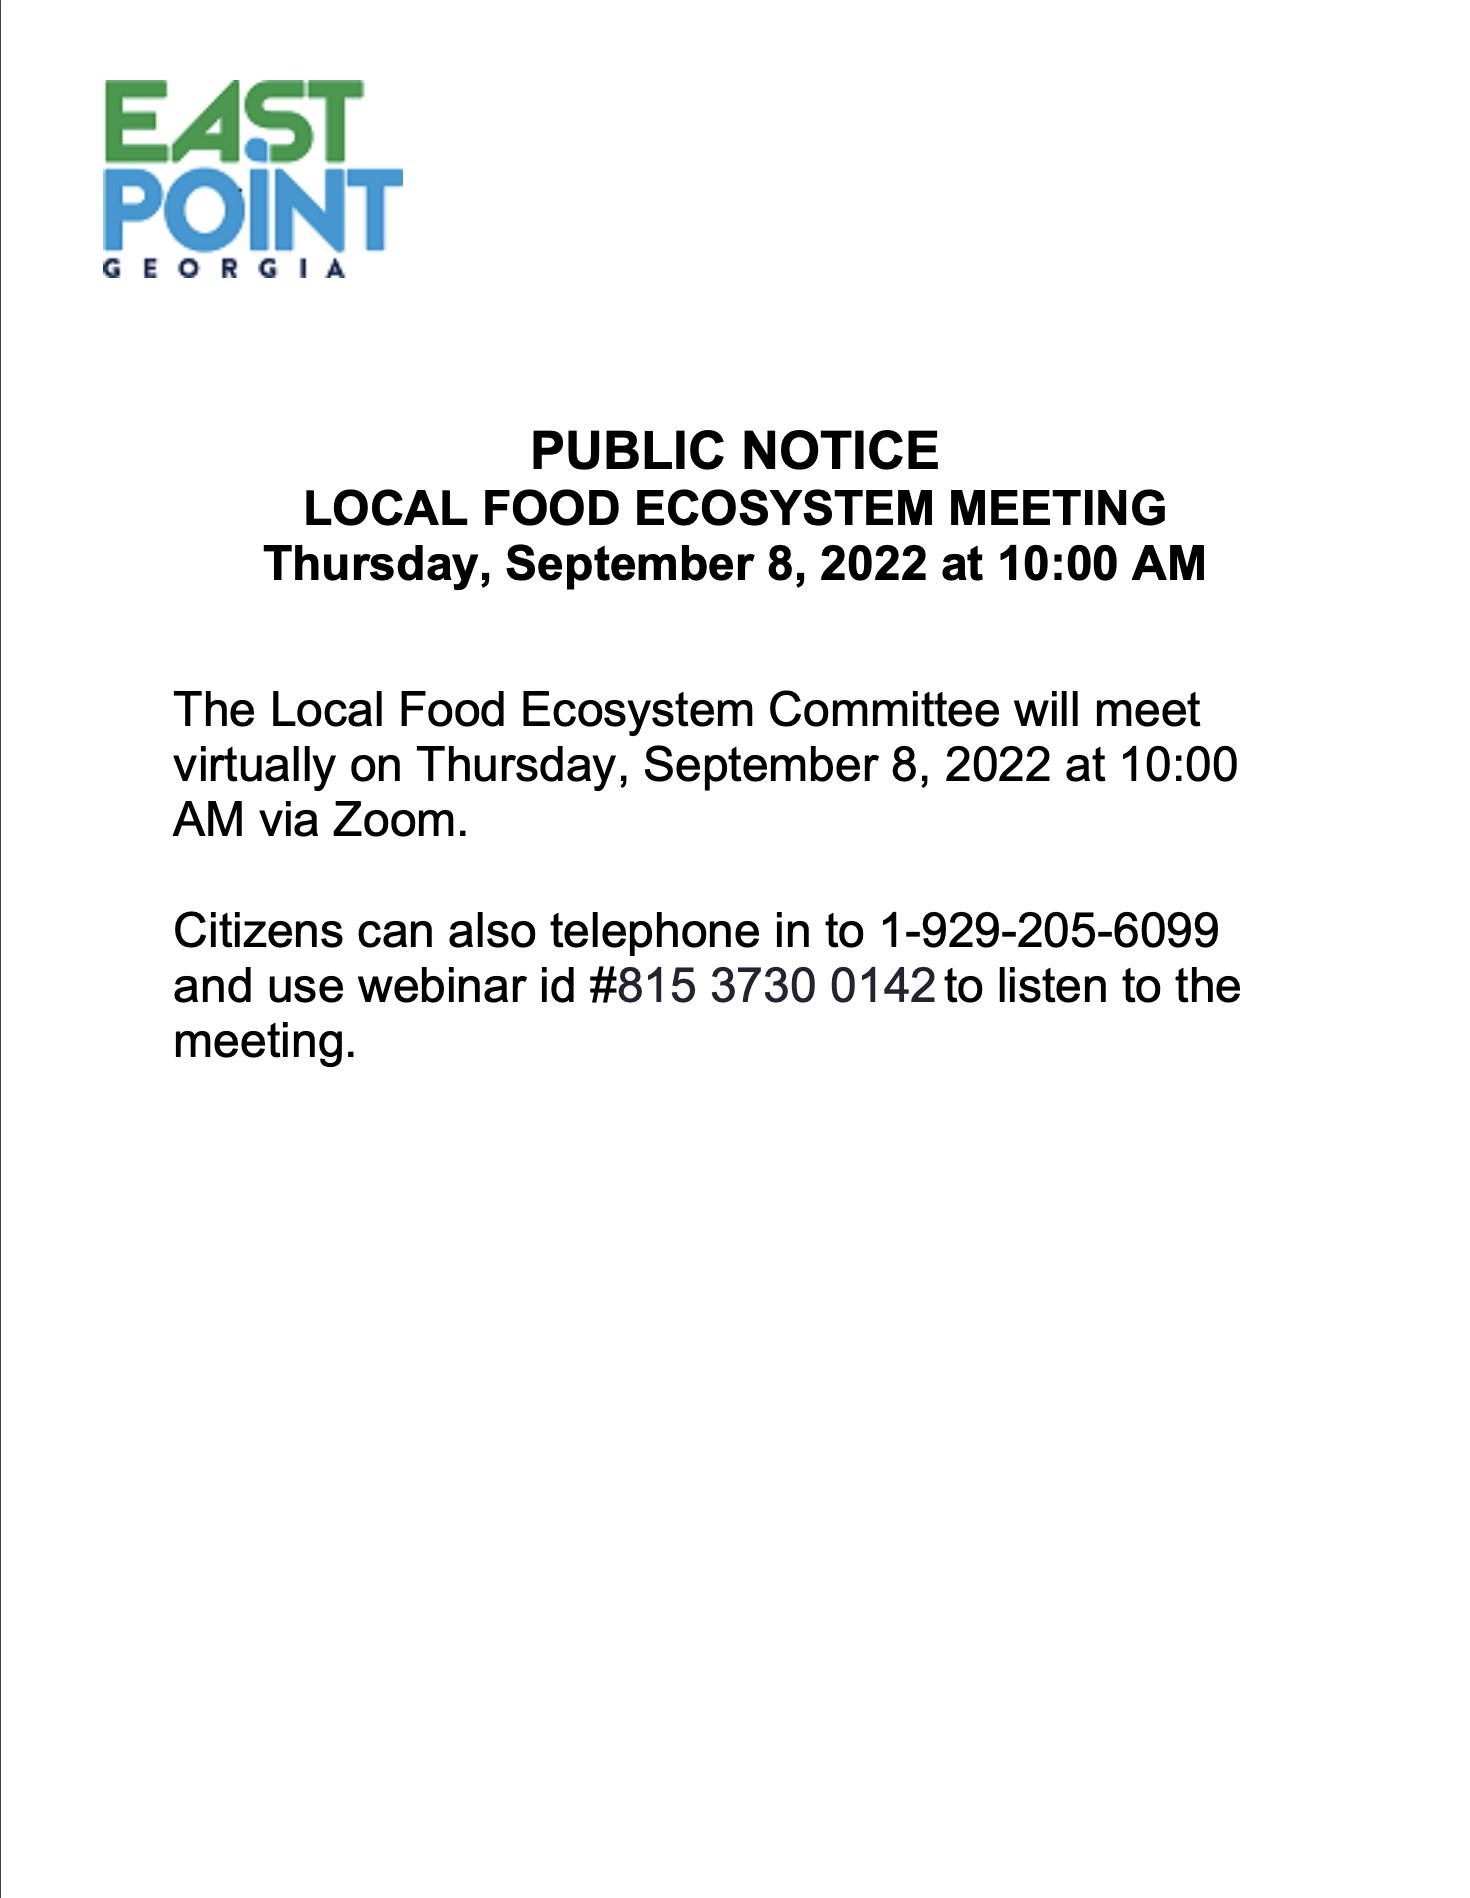 Local Food Ecosystem Commission Meeting